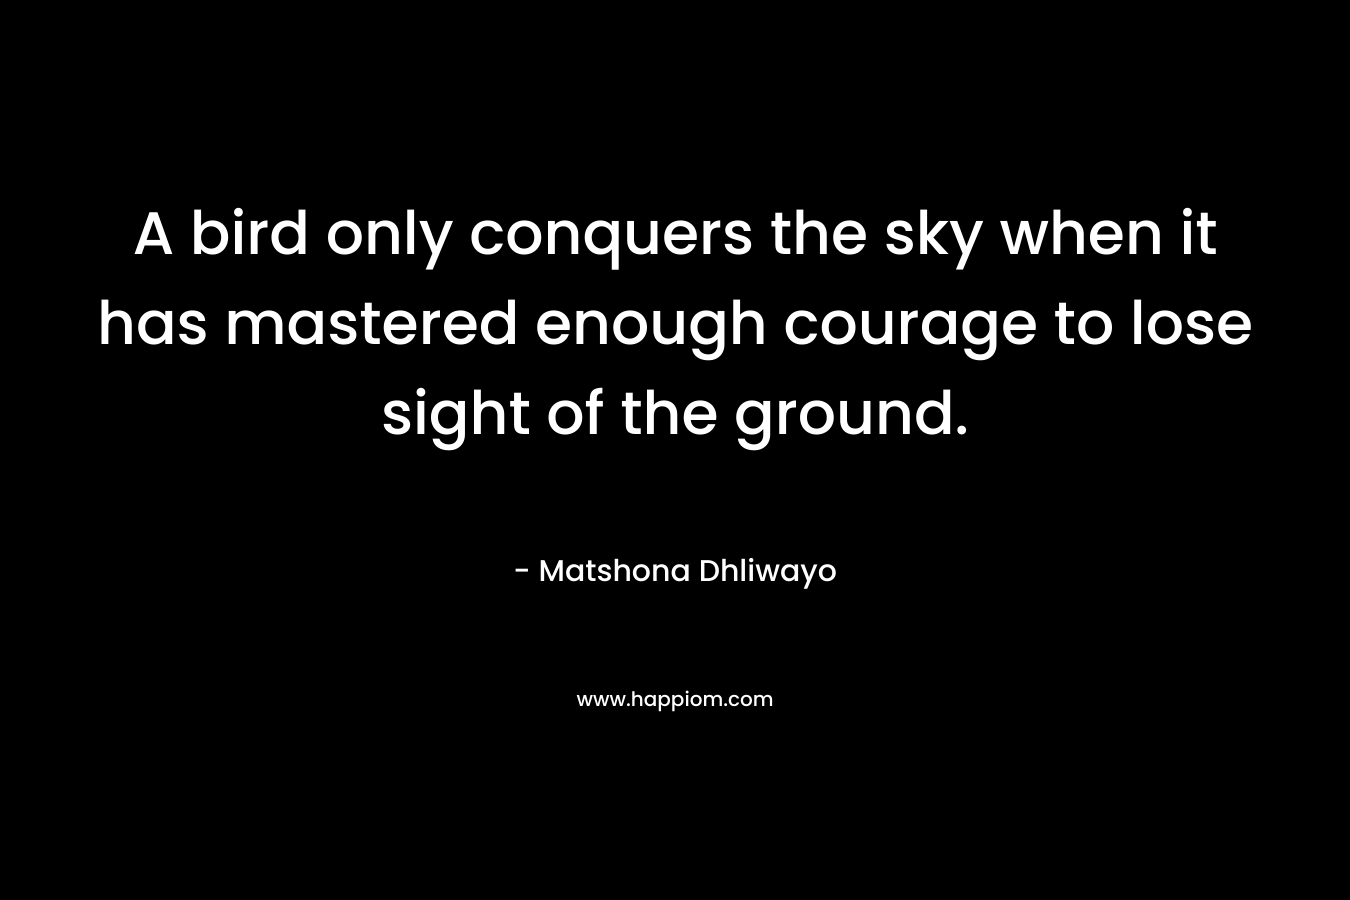 A bird only conquers the sky when it has mastered enough courage to lose sight of the ground.